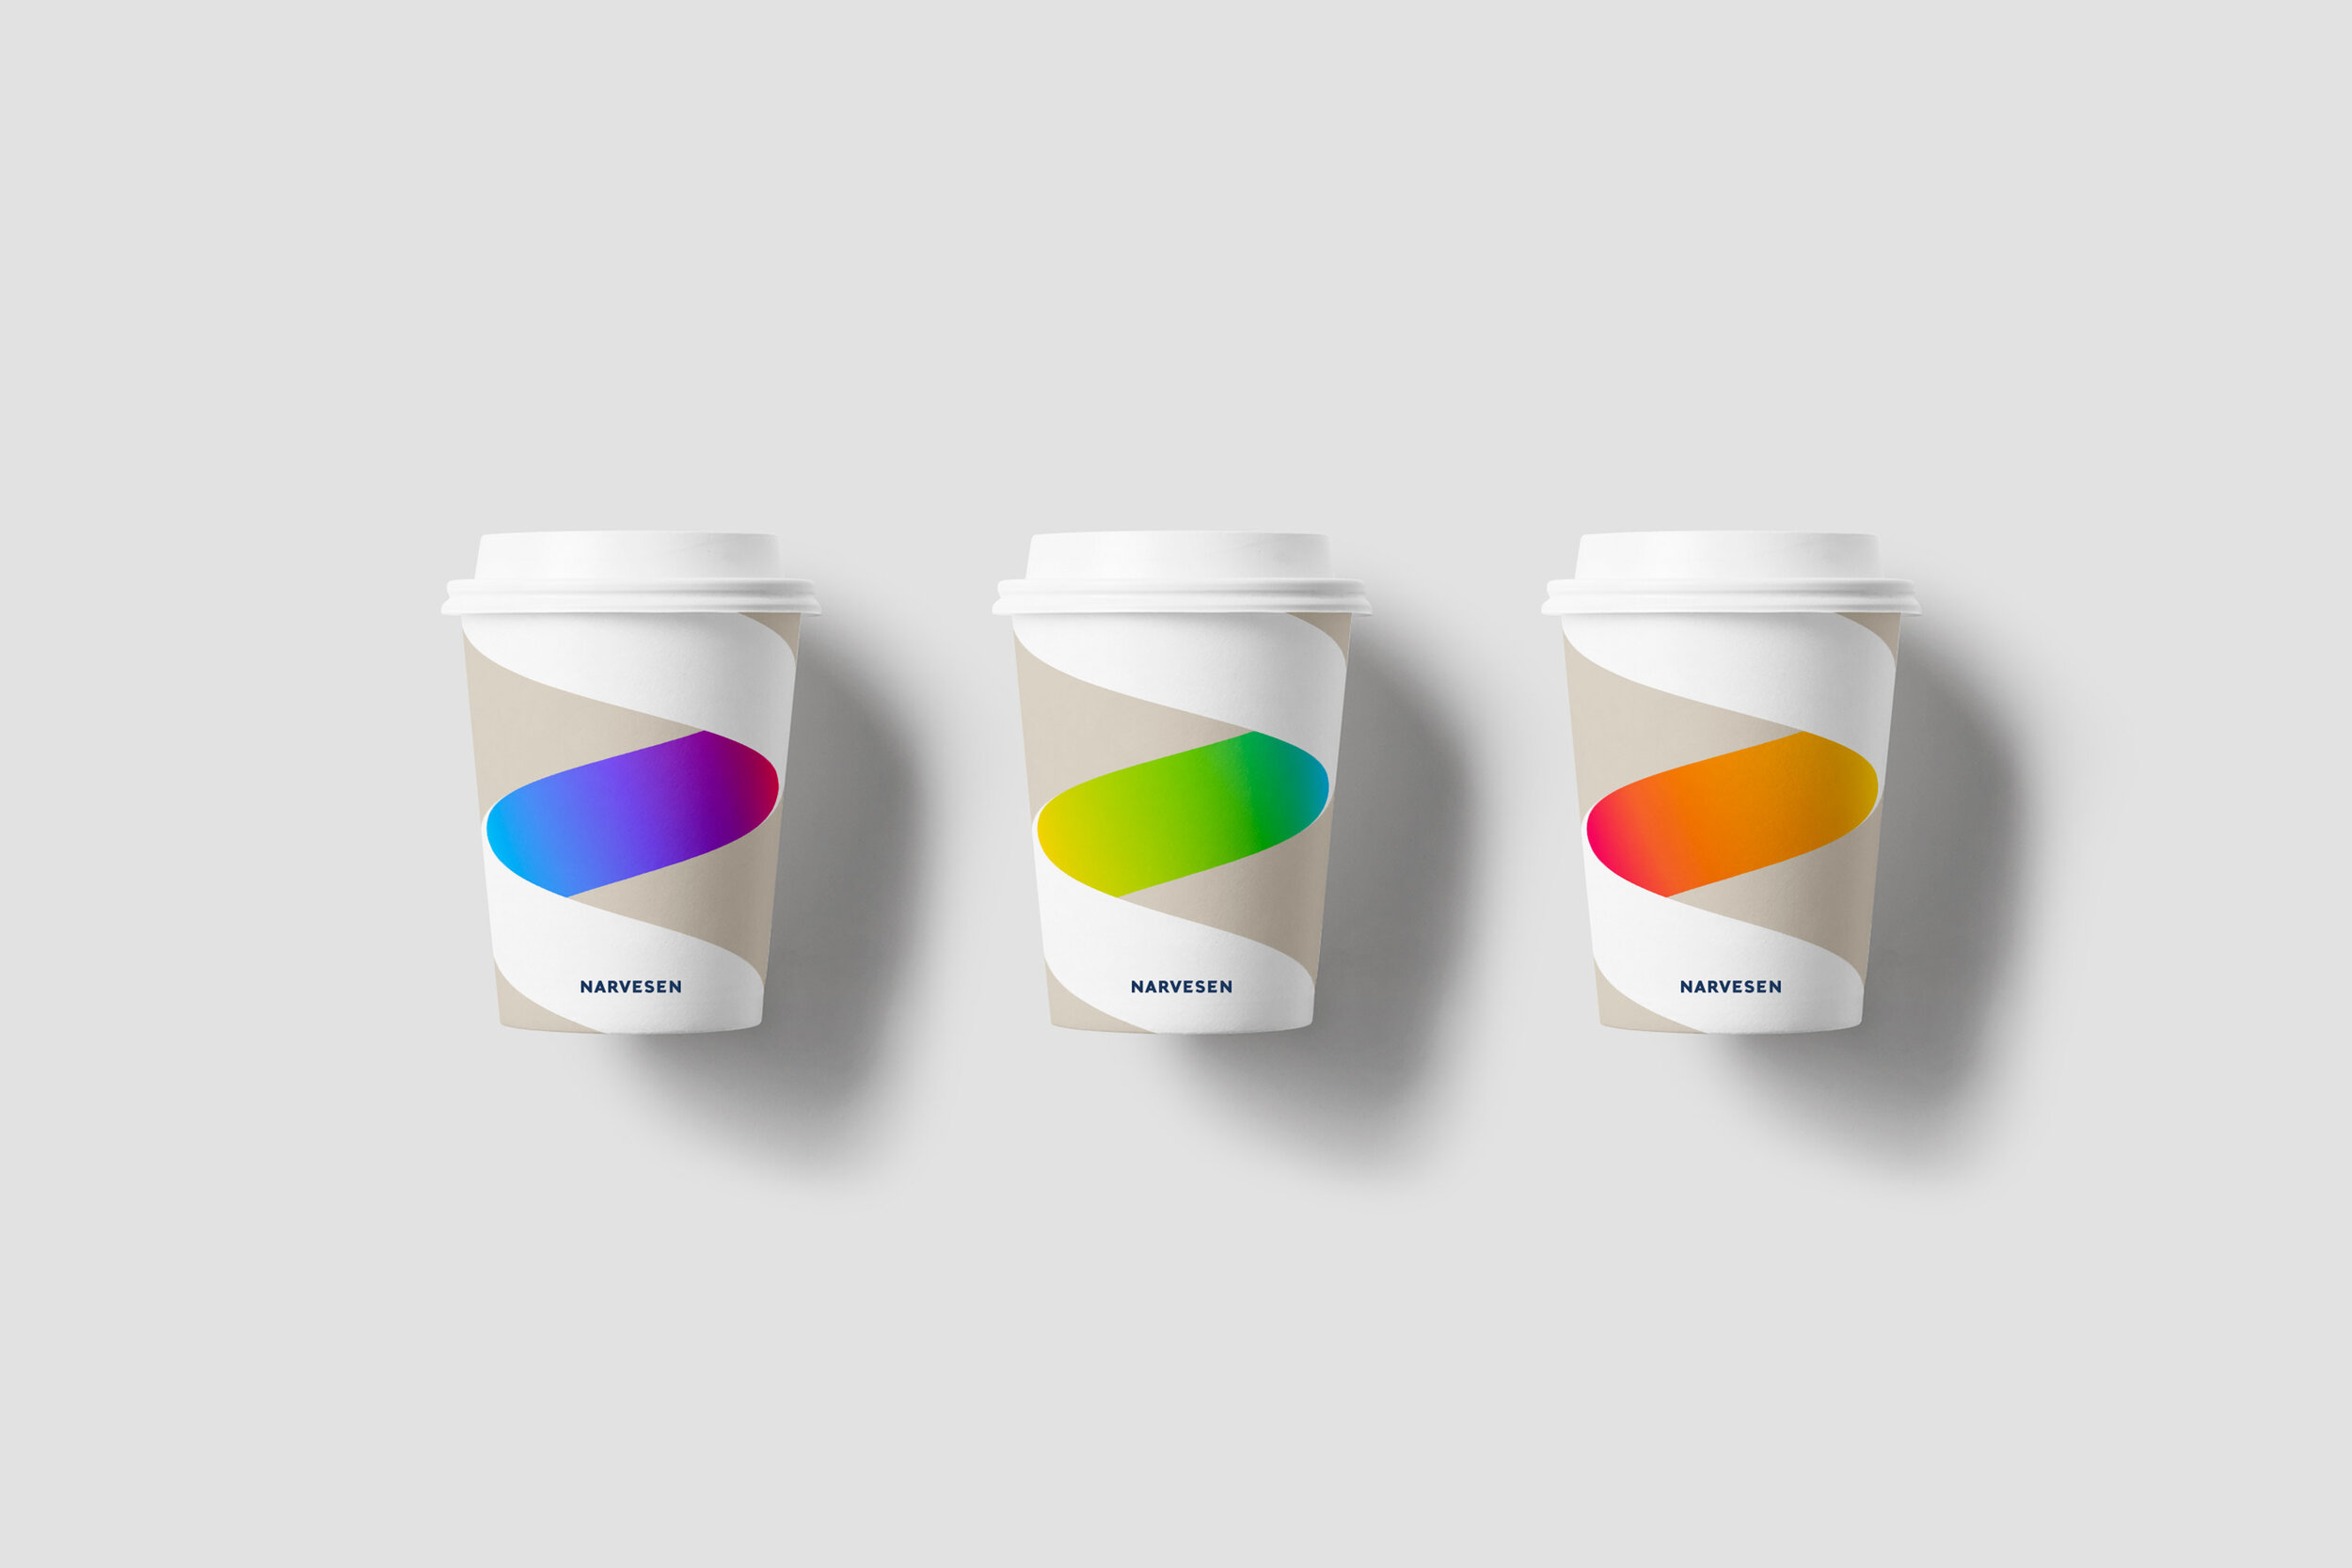 Example from the design agency how logos can be displayed on products to strengthen the brand.